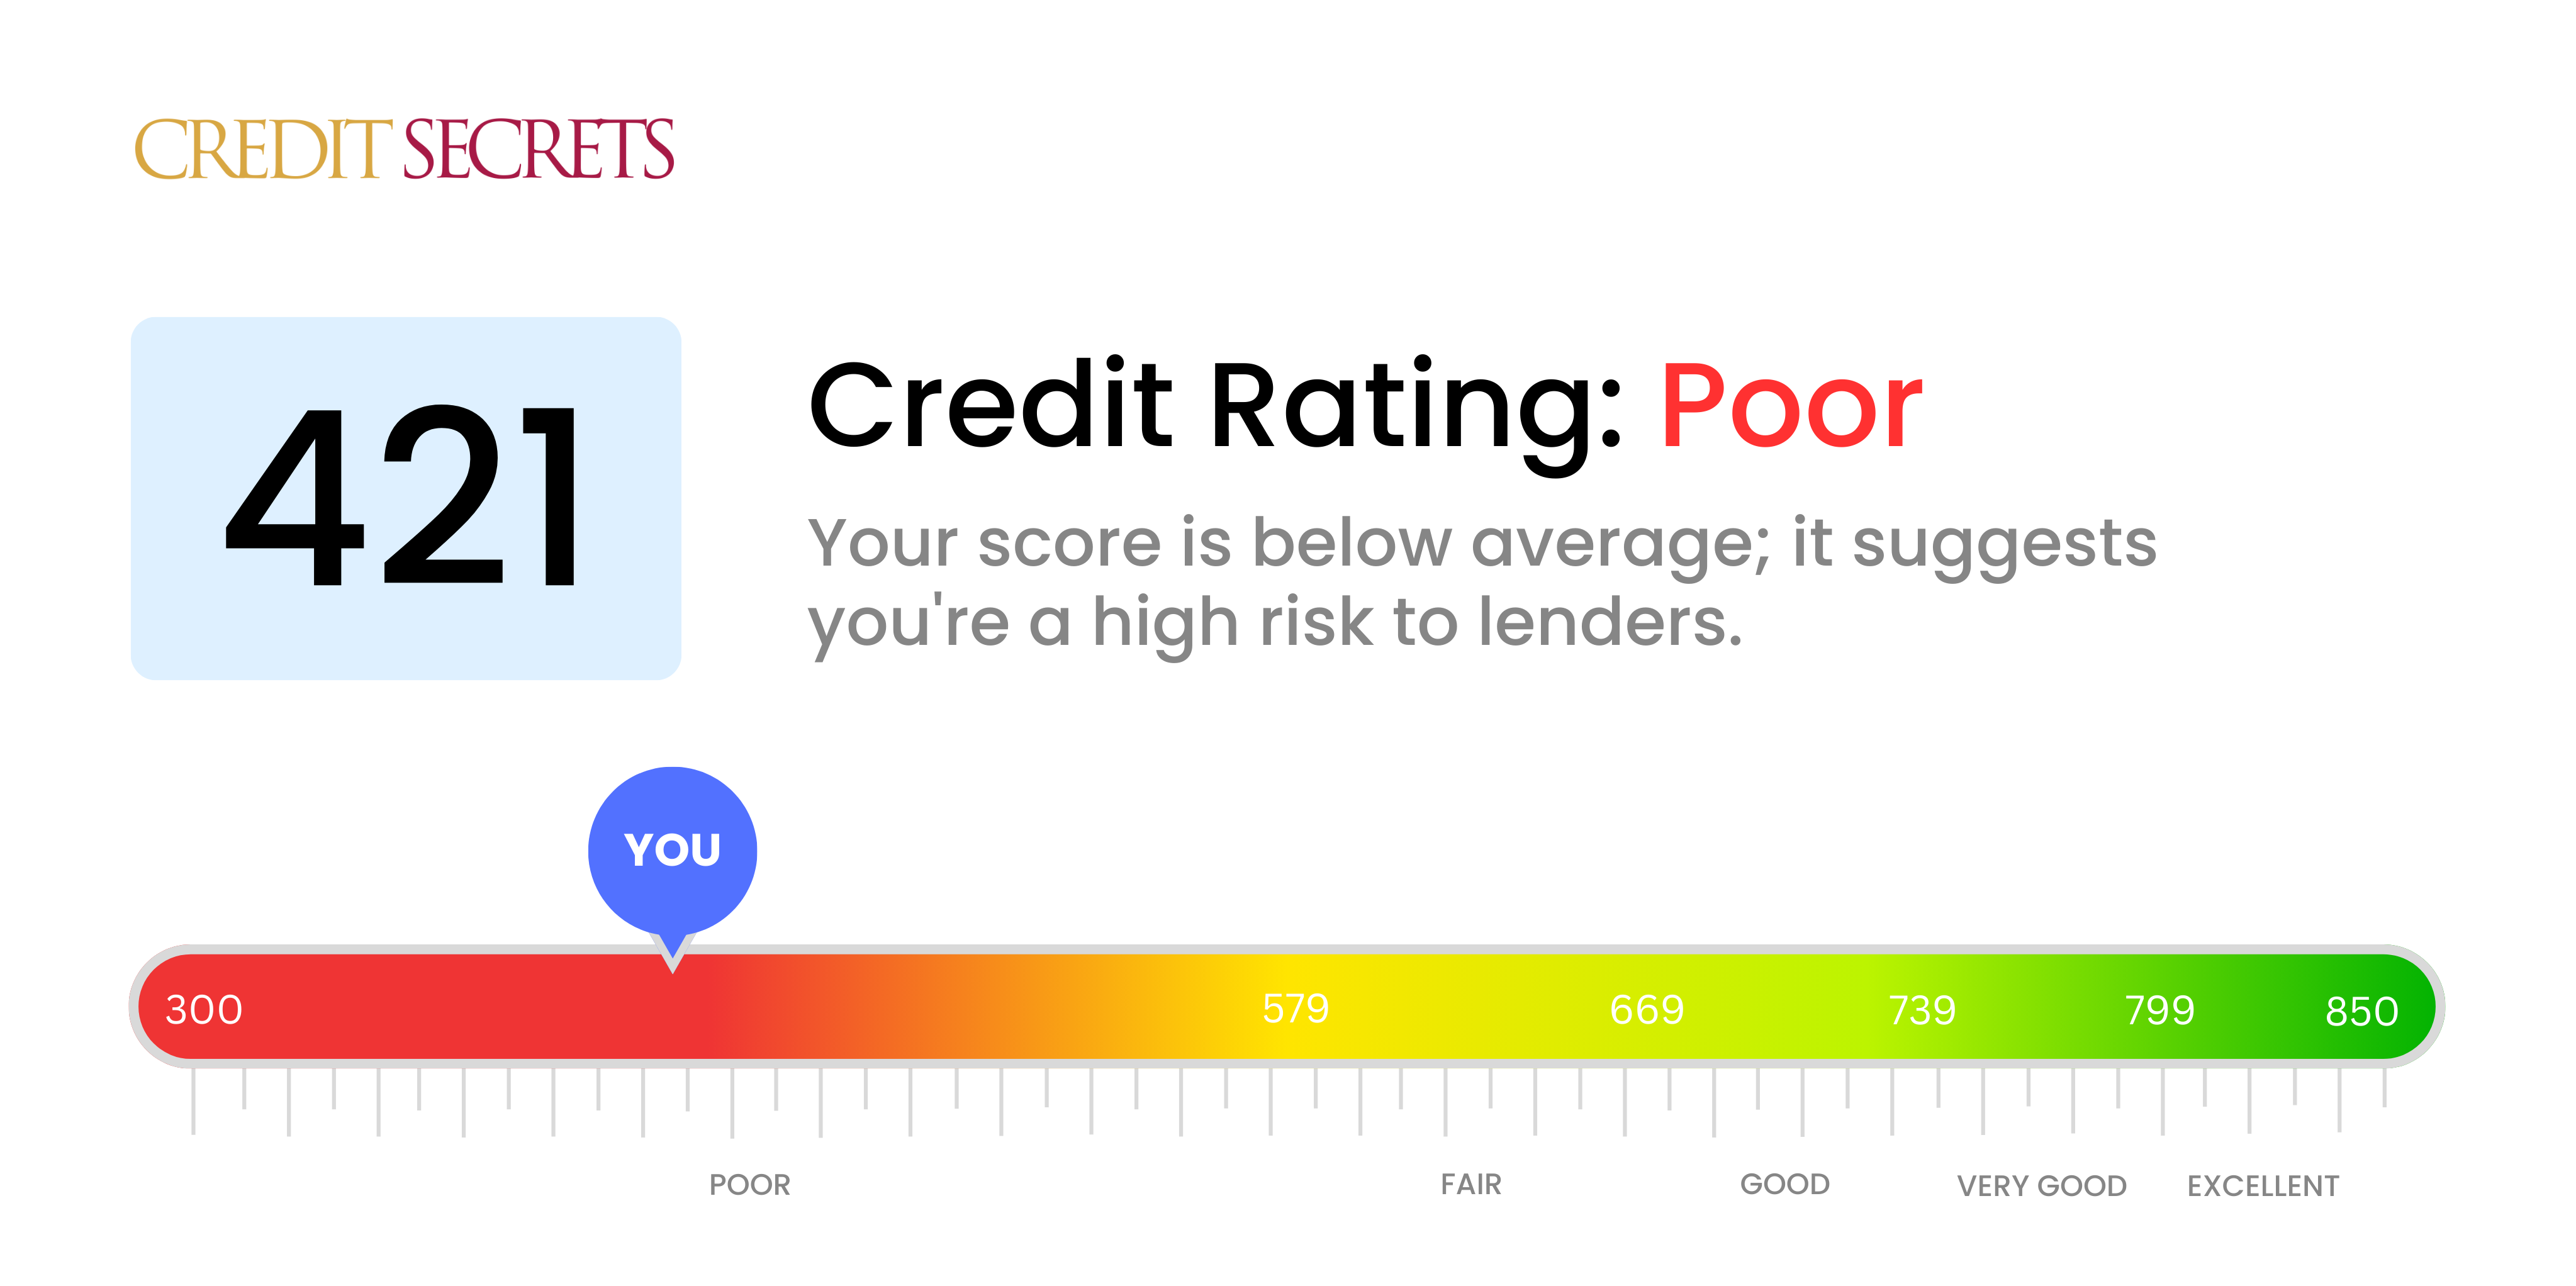 Is 421 a good credit score?